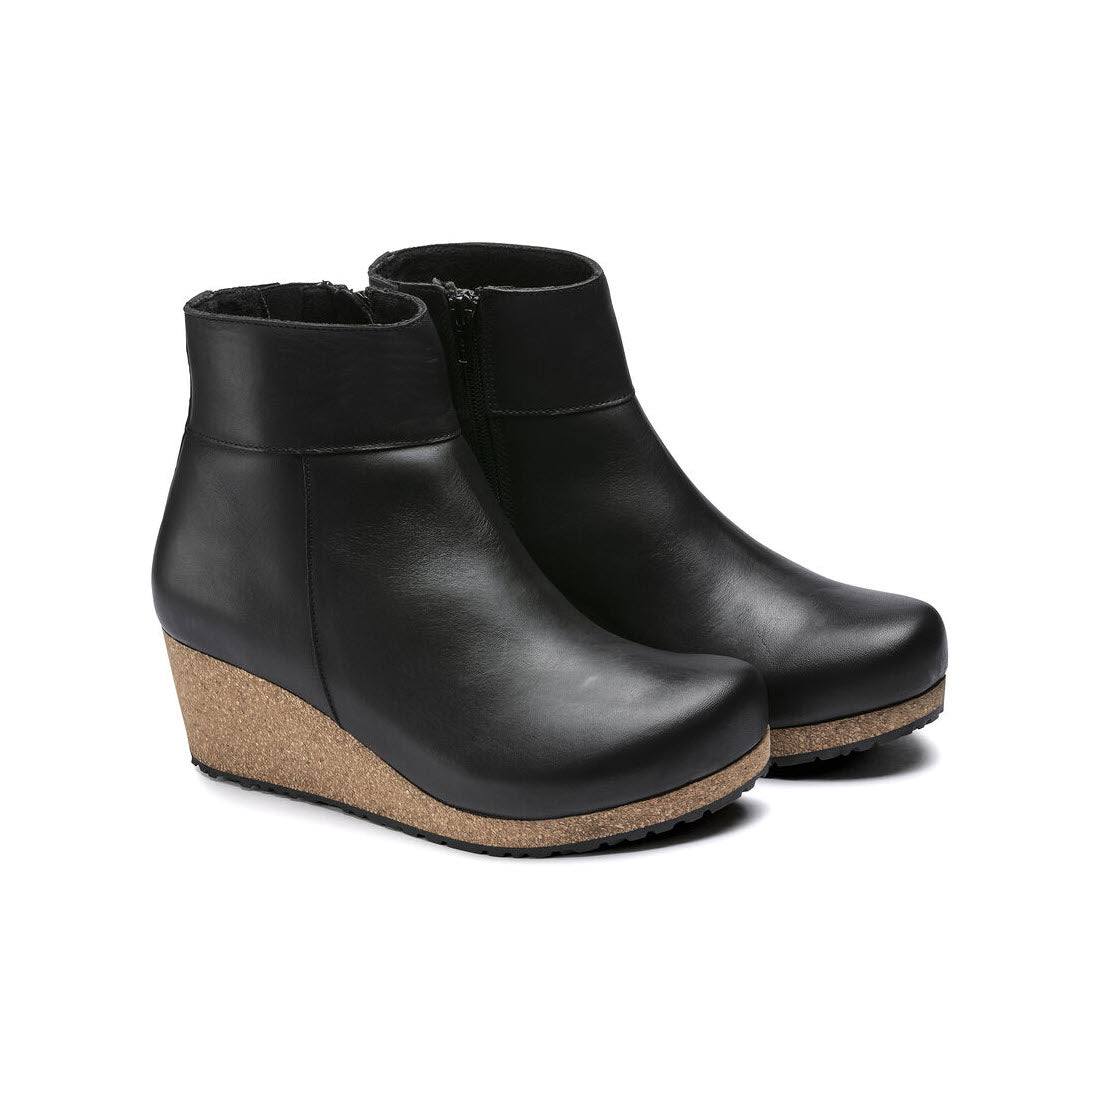 A pair of Birkenstock Papillio Ebba Black Leather wedge ankle boots with contoured footbeds and cork heels, isolated on a white background.